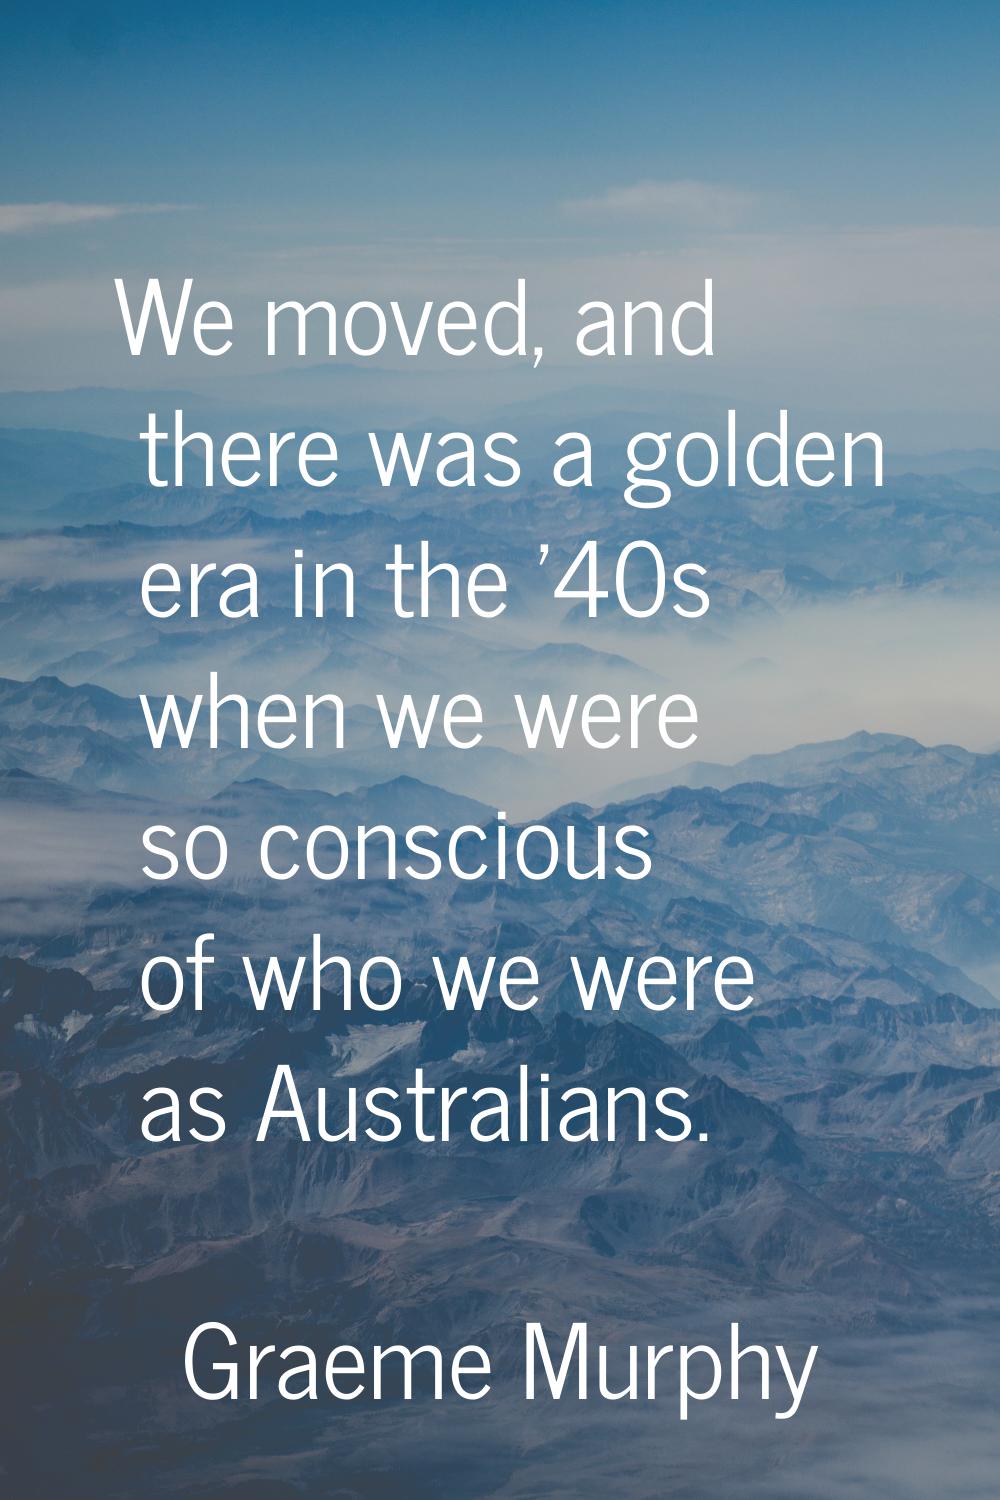 We moved, and there was a golden era in the '40s when we were so conscious of who we were as Austra